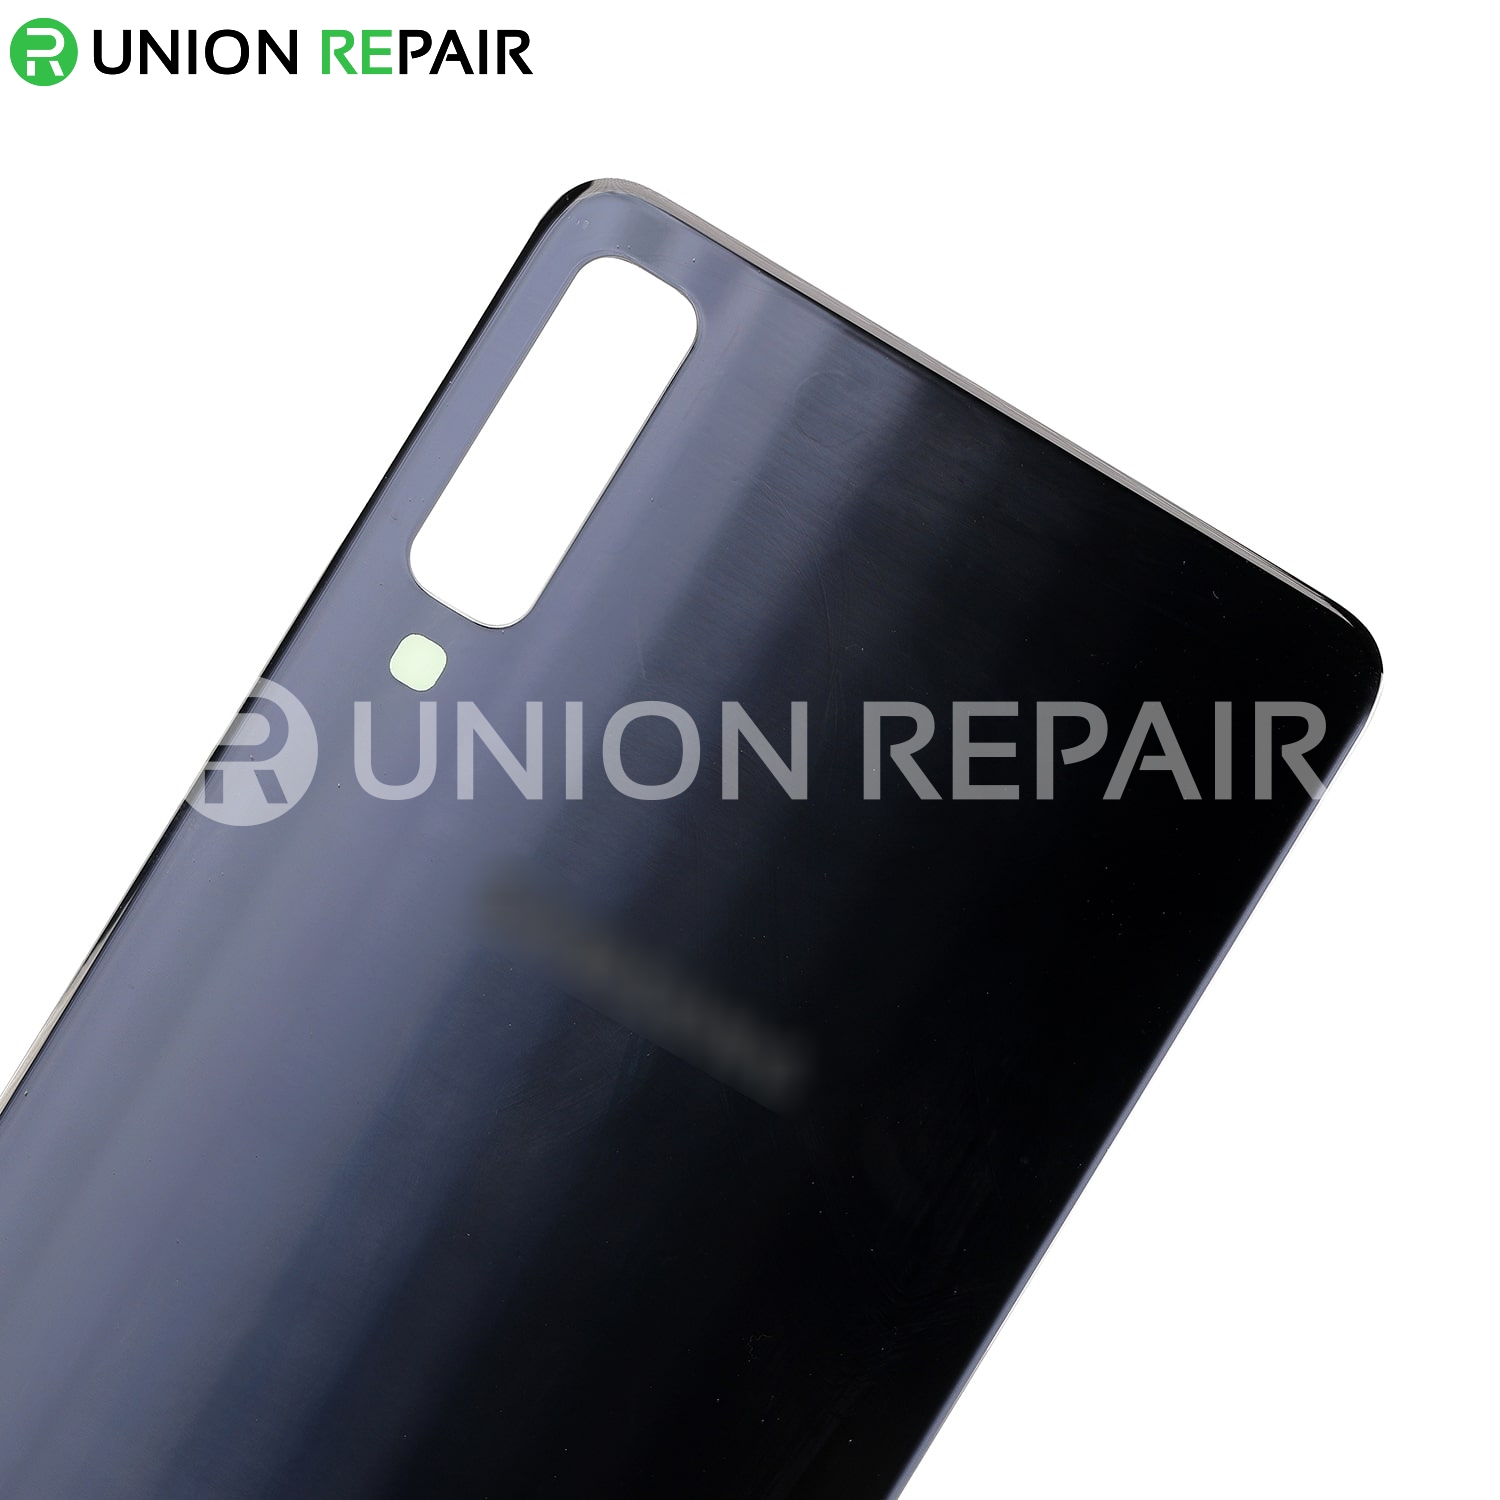 Replacement for Samsung Galaxy A7 (2018) SM-A750 Battery Door - Black